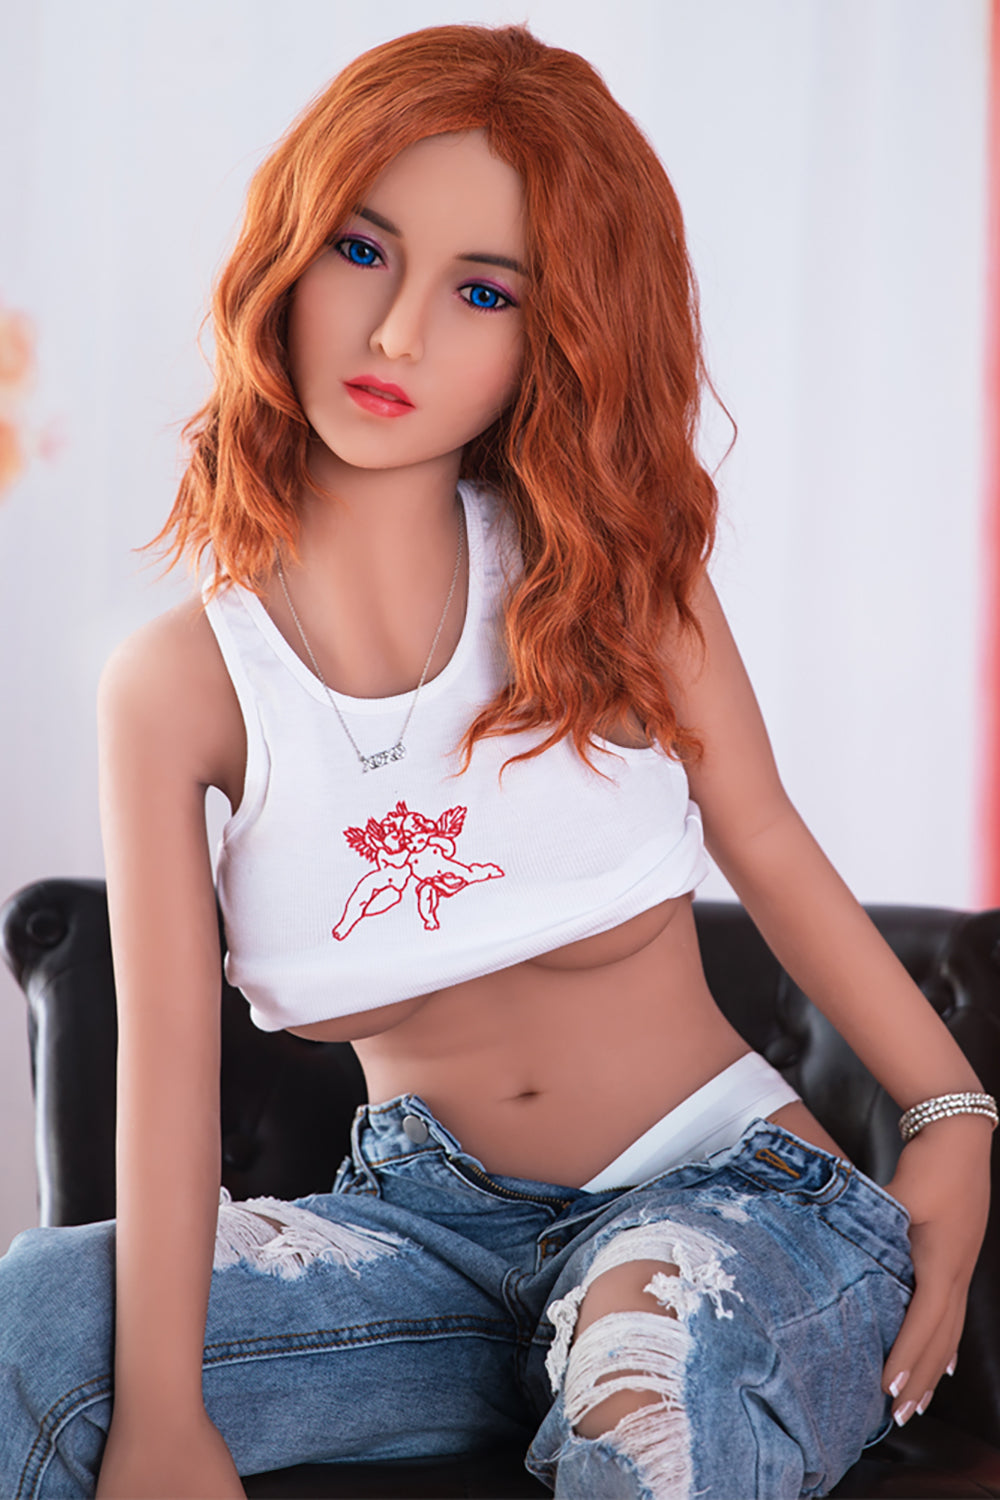 US Stock - Haven 150cm 187# Head Tanned Skin Sexy Real Love Doll TPE Sex Doll